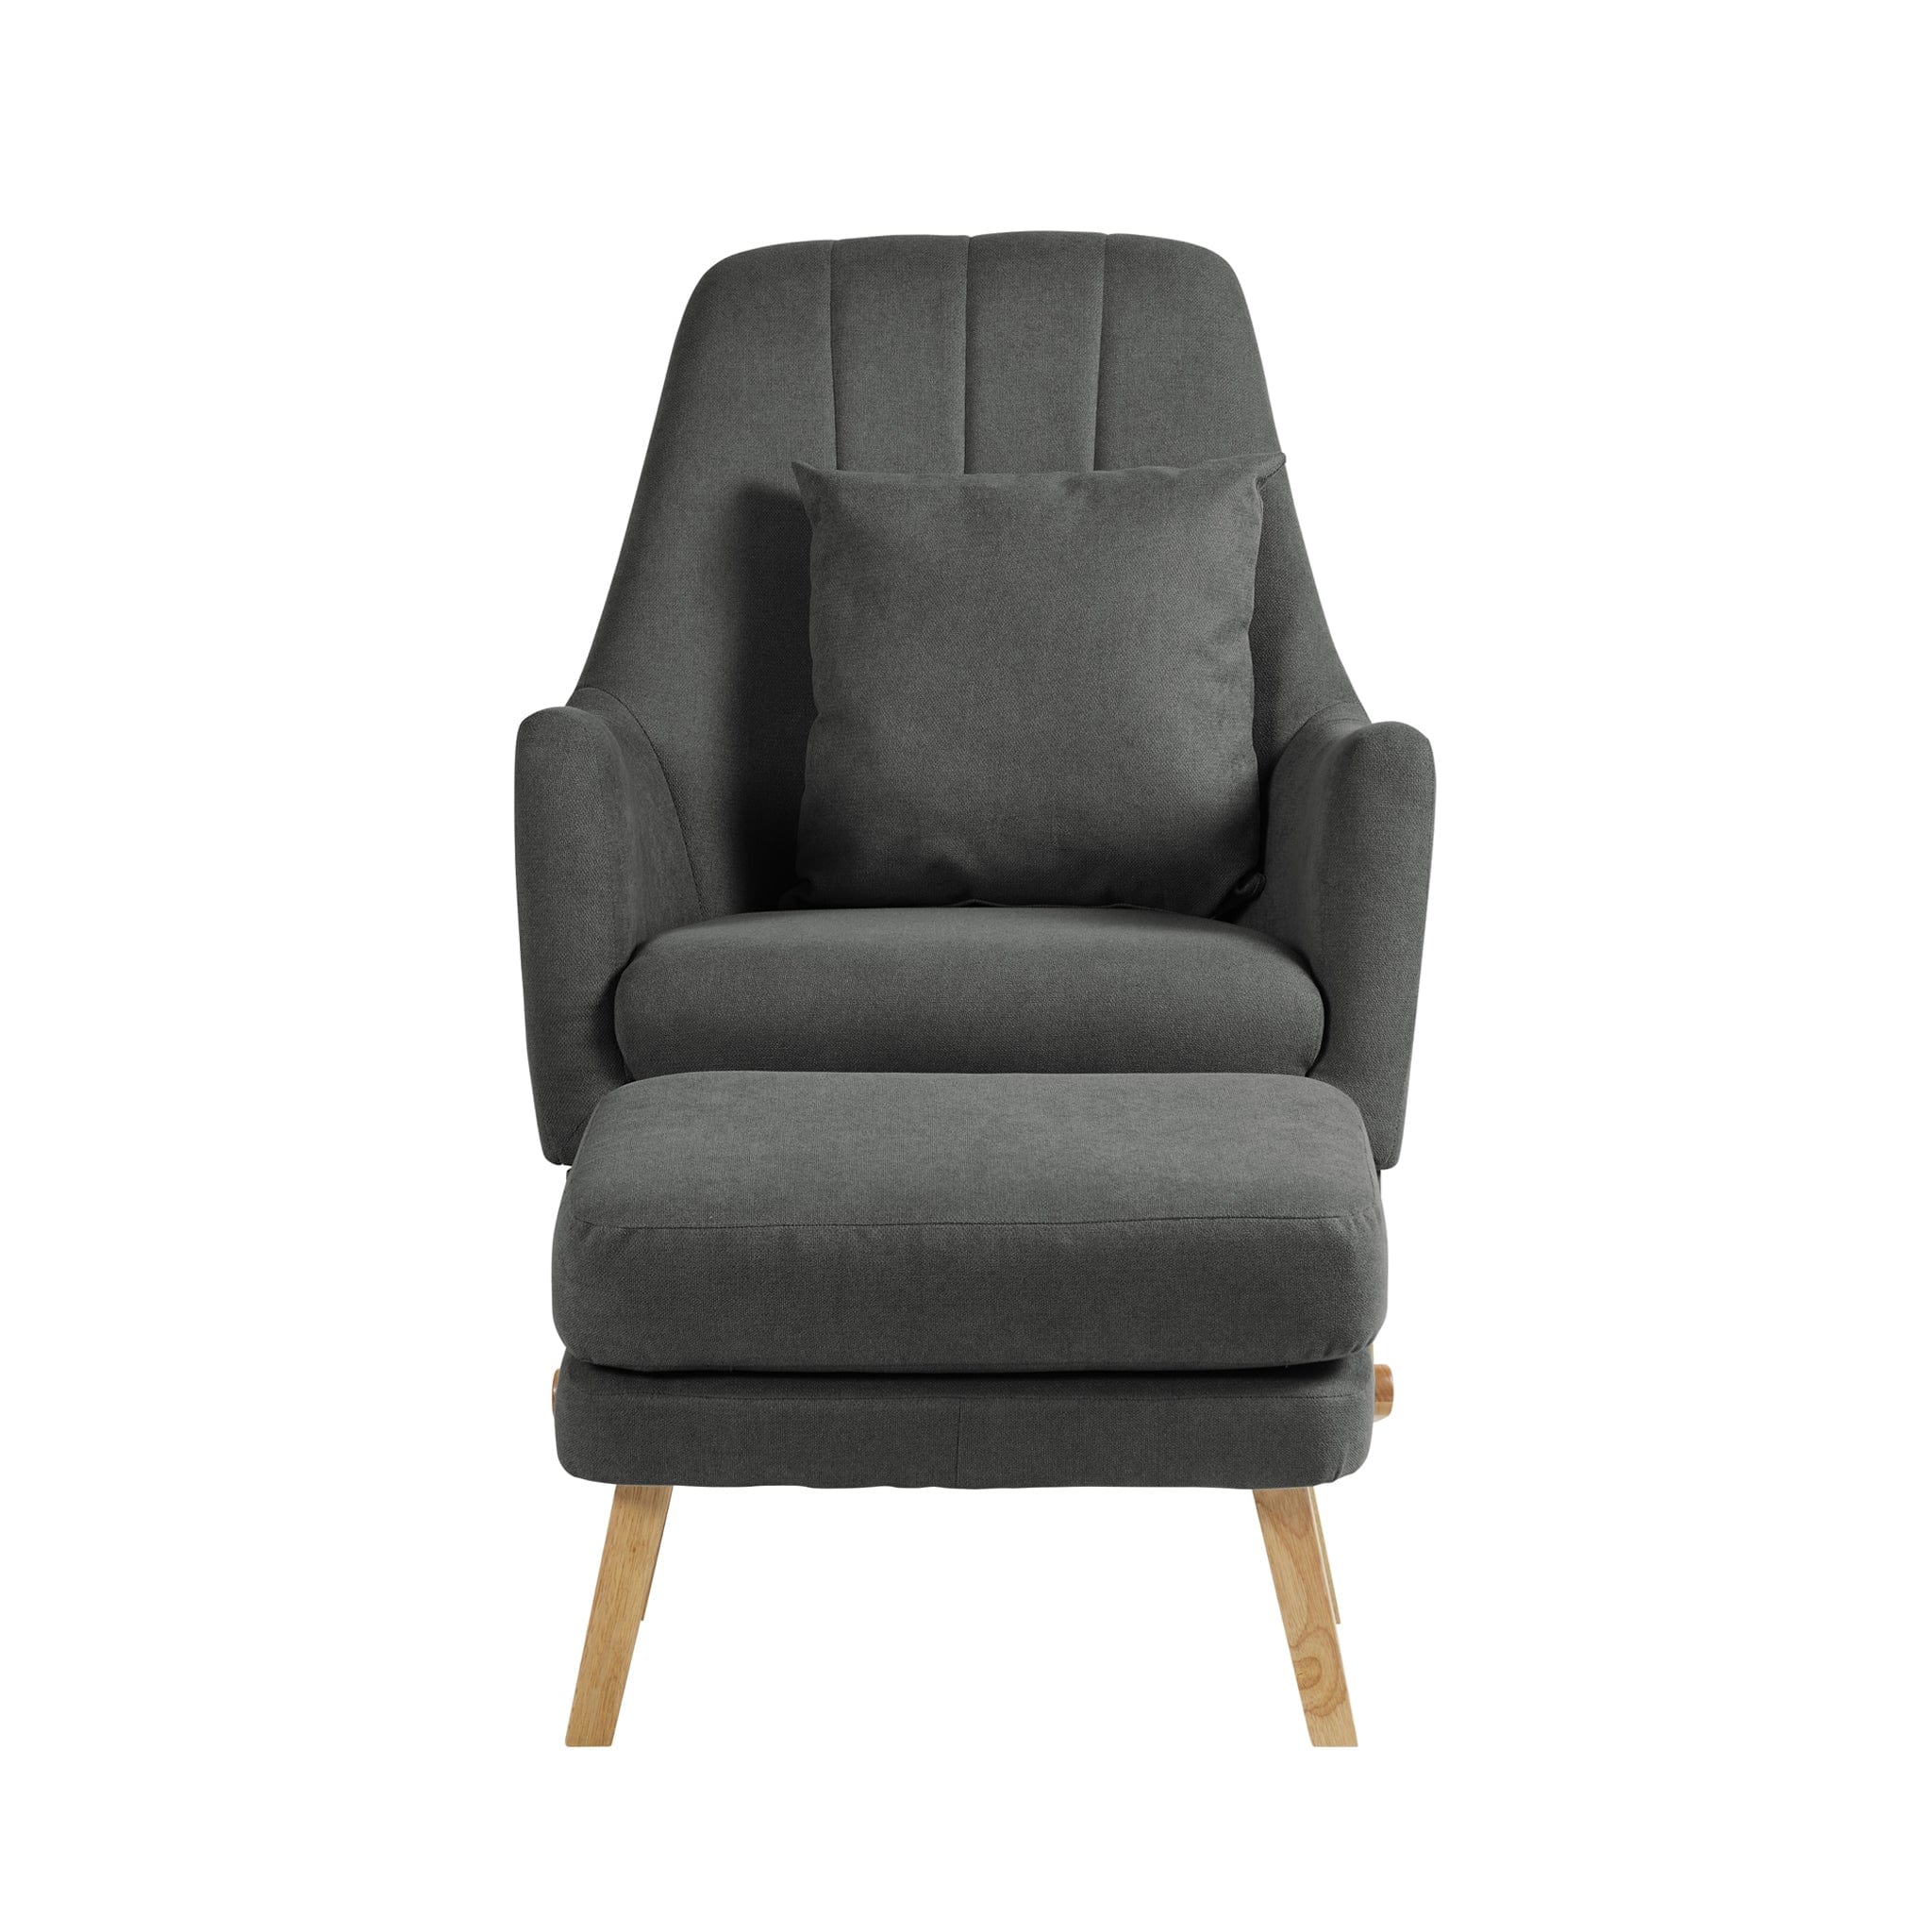 Ickle Bubba Nursing Chairs Ickle Bubba Eden Deluxe Nursery Chair and Stool Charcoal Grey 48-008-000-844